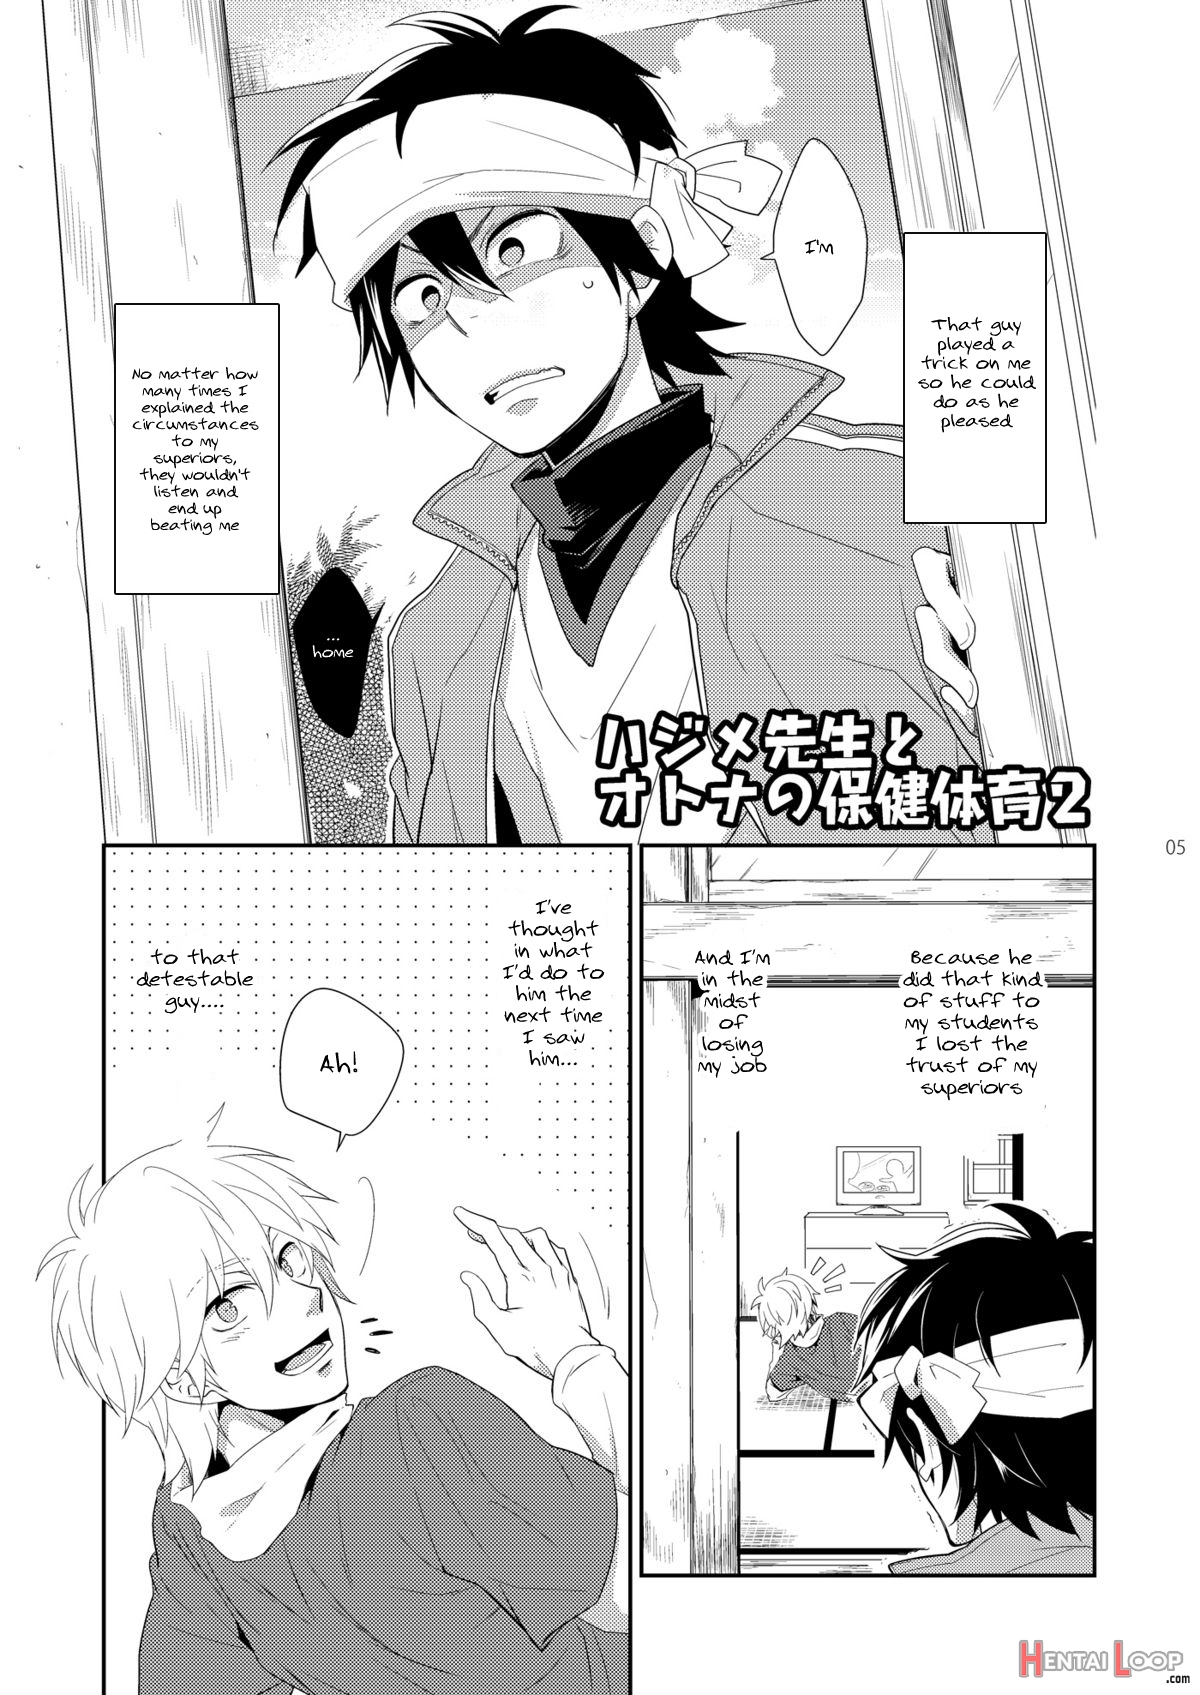 Hajime-sensei And The Adult Health And Physical Education 2 page 4